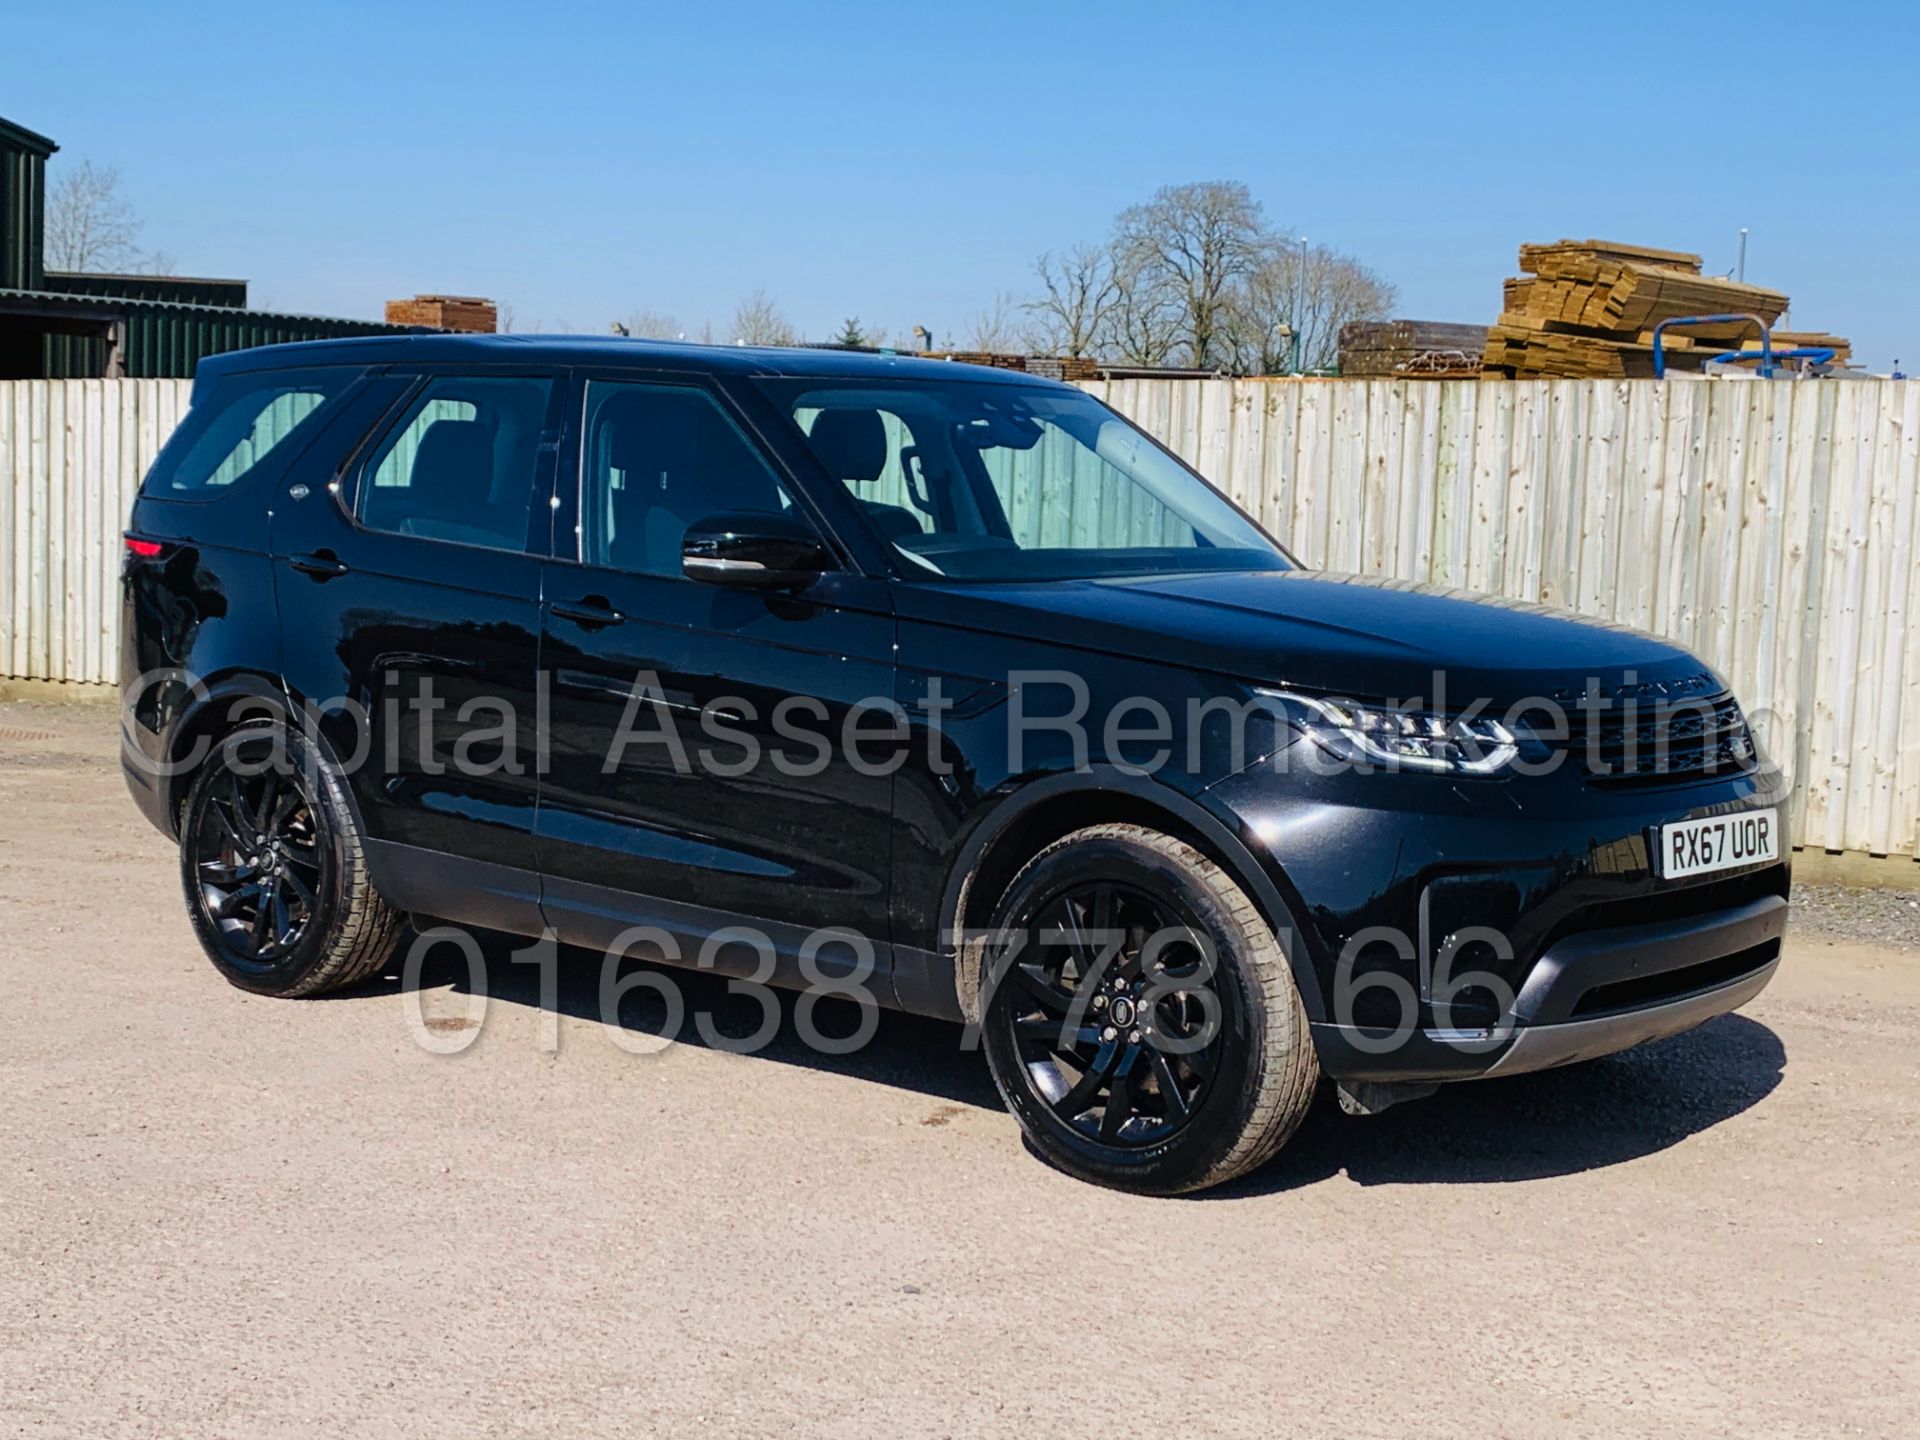 (On Sale) LAND ROVER DISCOVERY *7 SEATER SUV* (67 REG) 'AUTO-LEATHER-SAT NAV' *38,000 MILES*